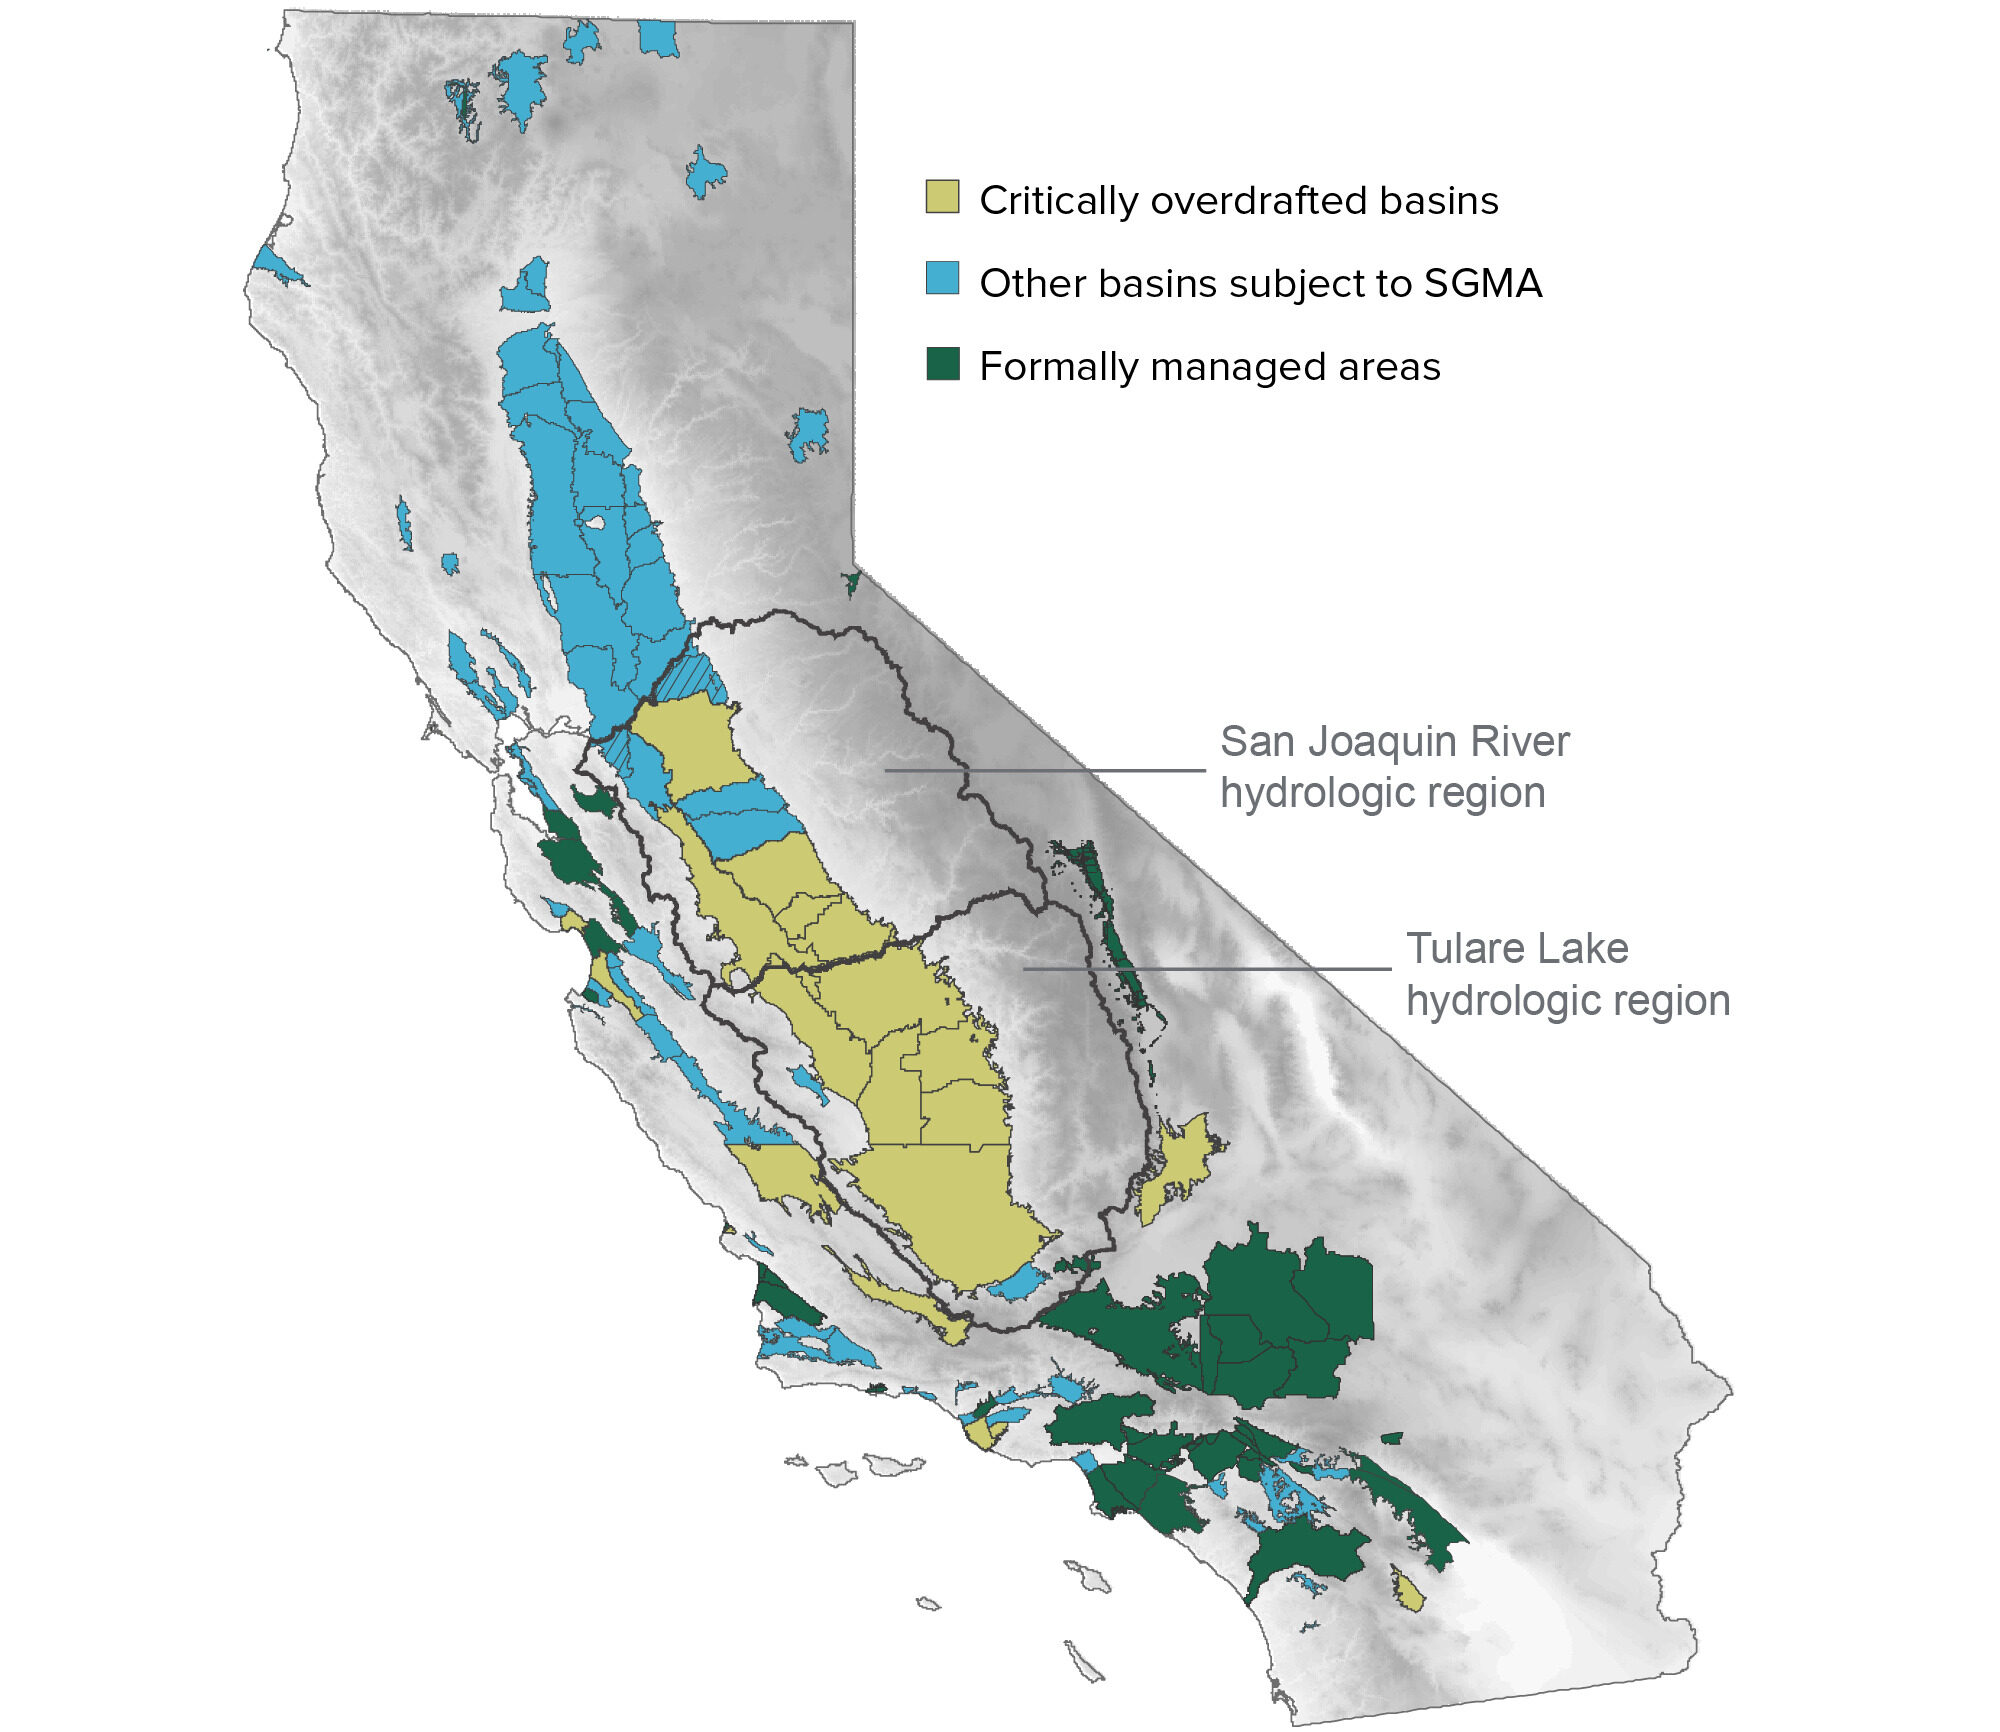 figure - The valley is home to most of the states critically overdrafted basins